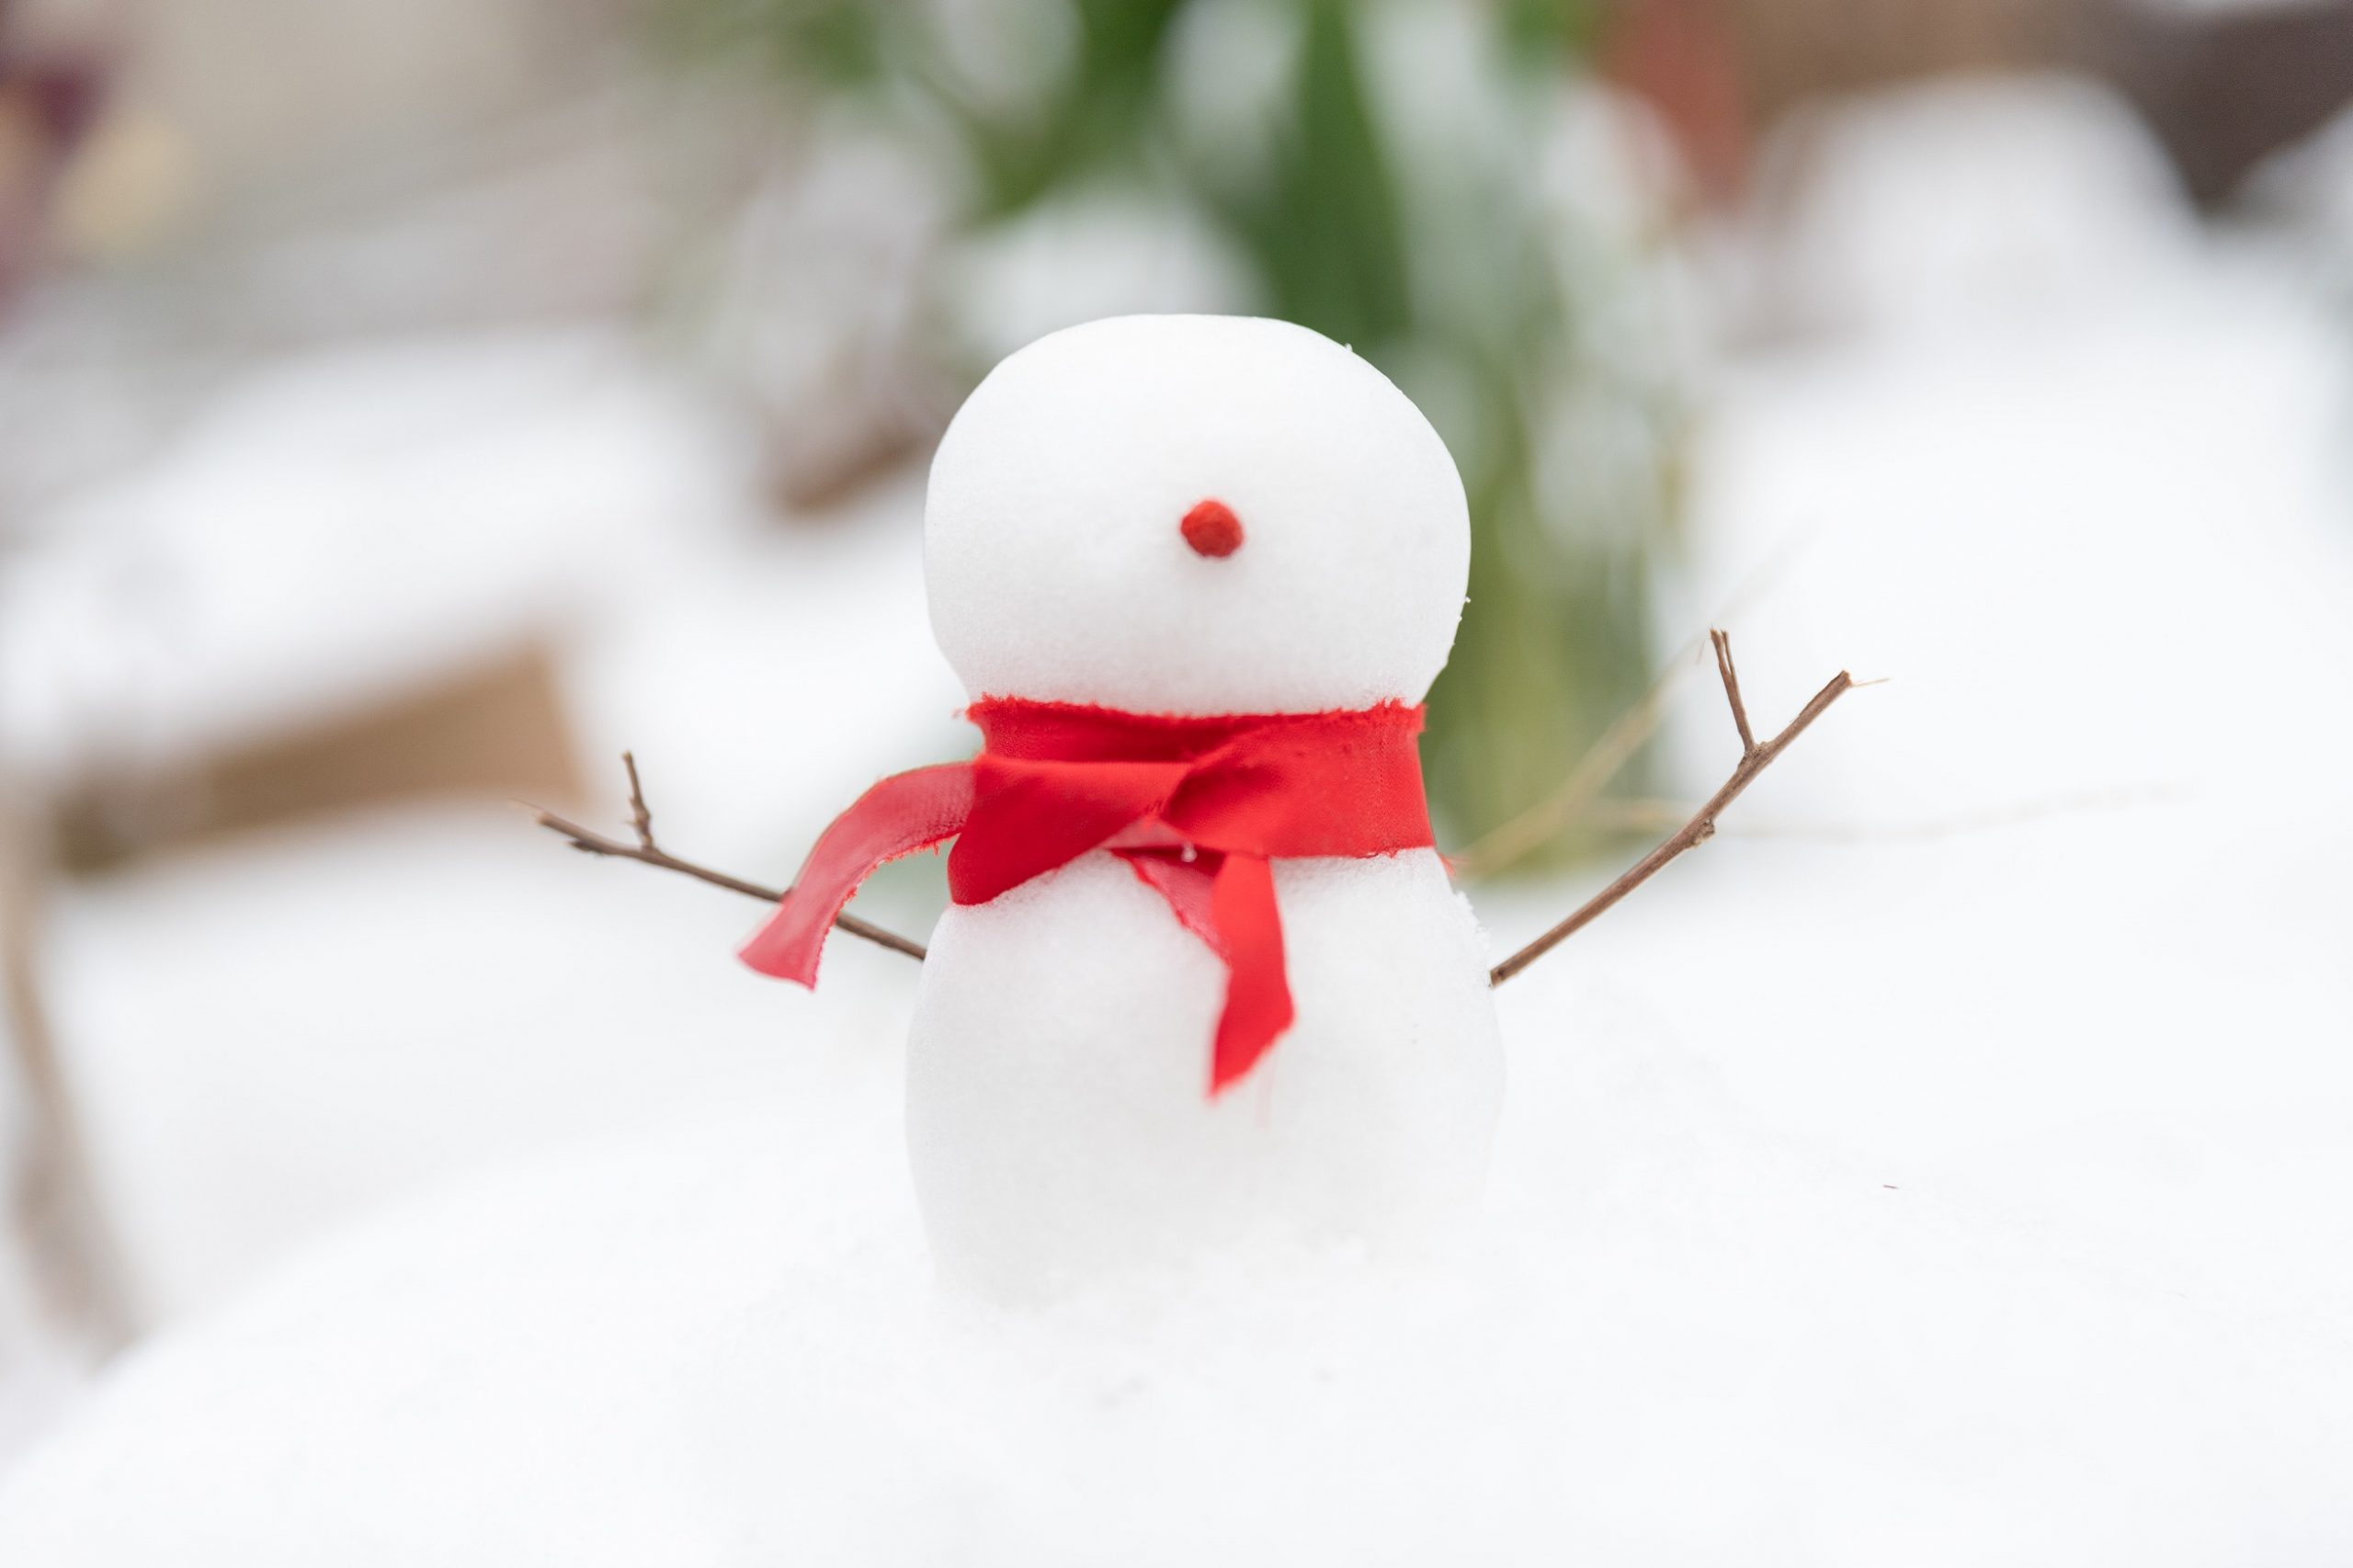 A small snowman with a red ribbon tied around its neck for a scarf